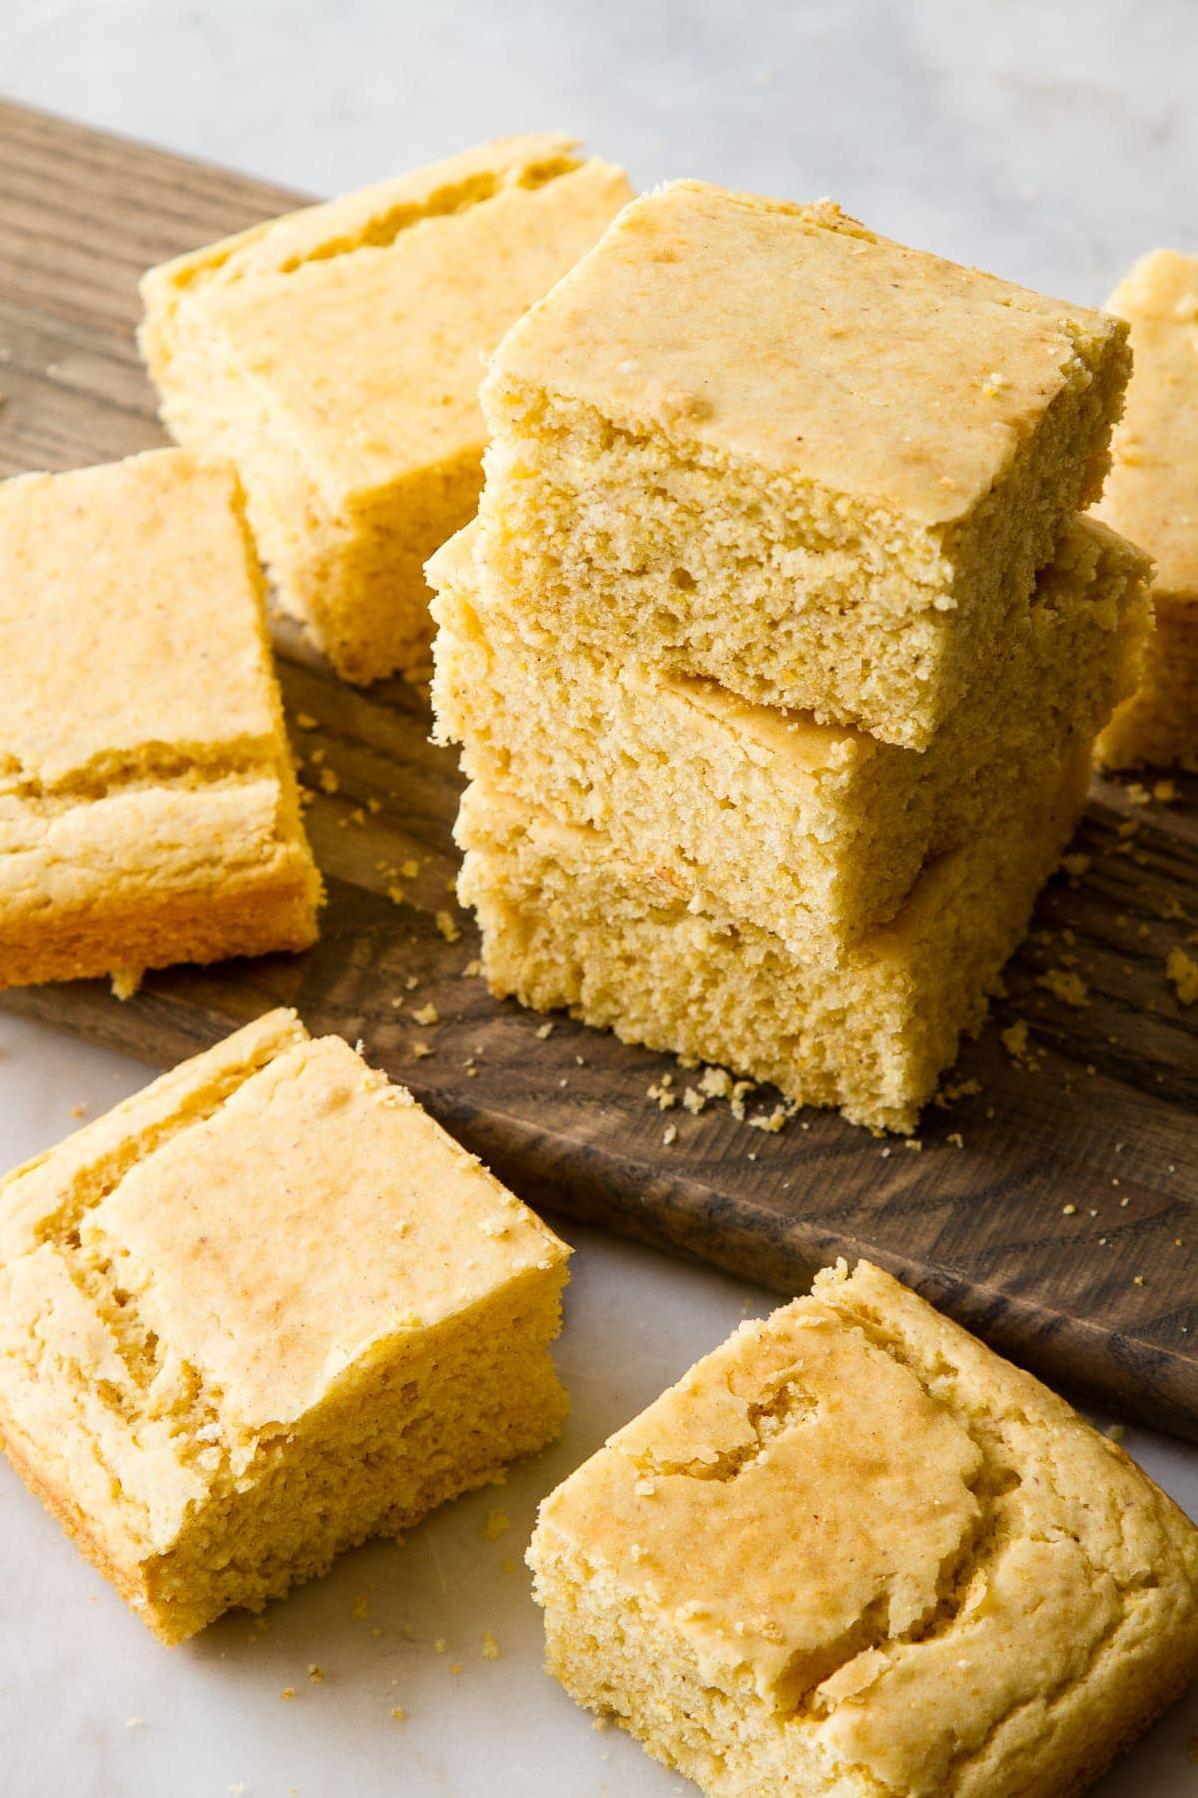  This delicious cornbread is the perfect side dish for any meal or a quick snack on-the-go.